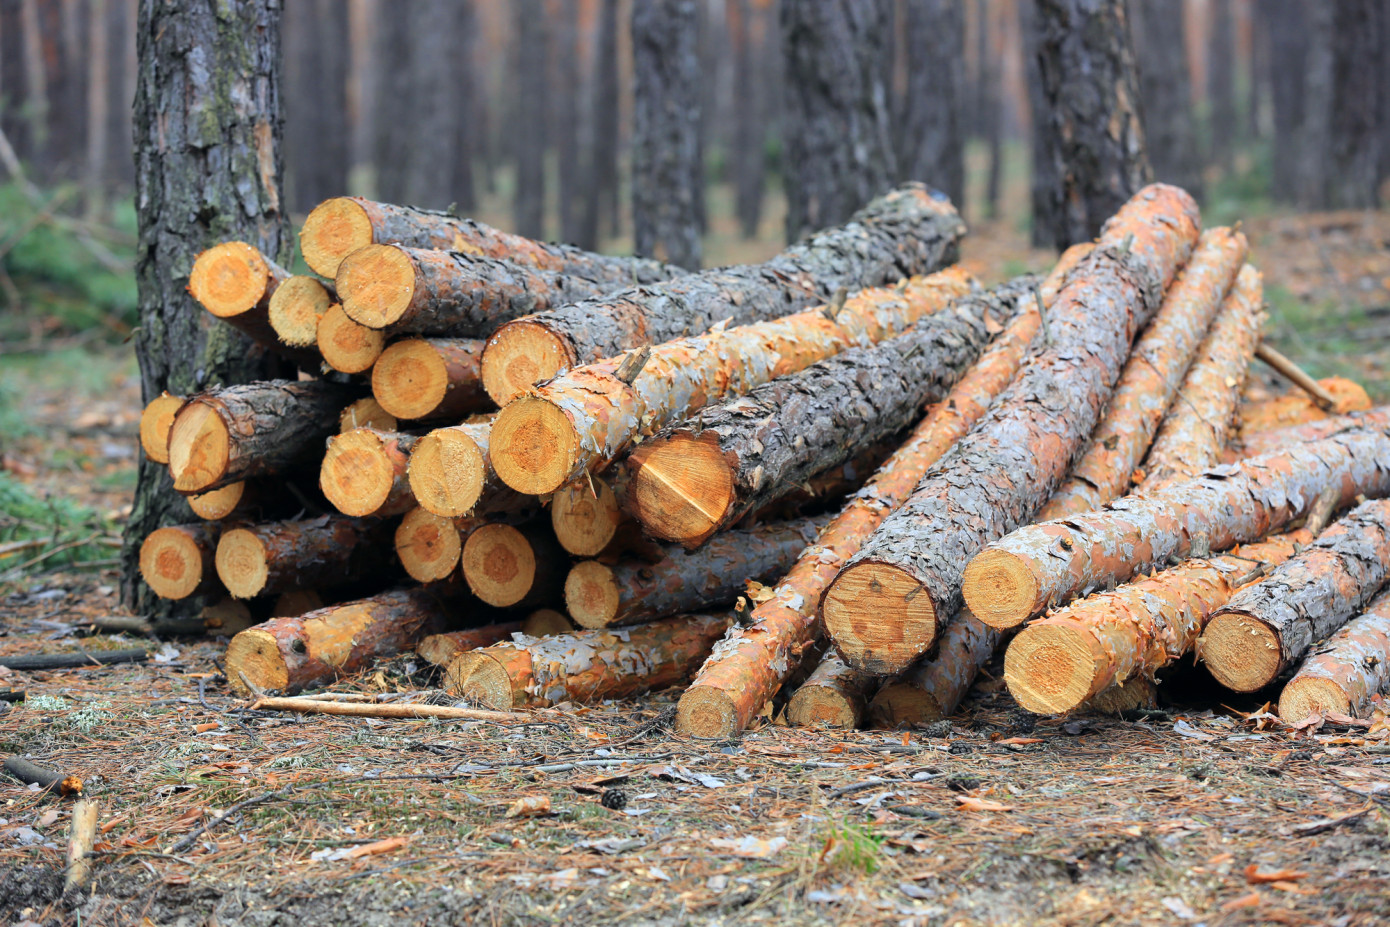 Finnish roundwood prices increased by 1% in November